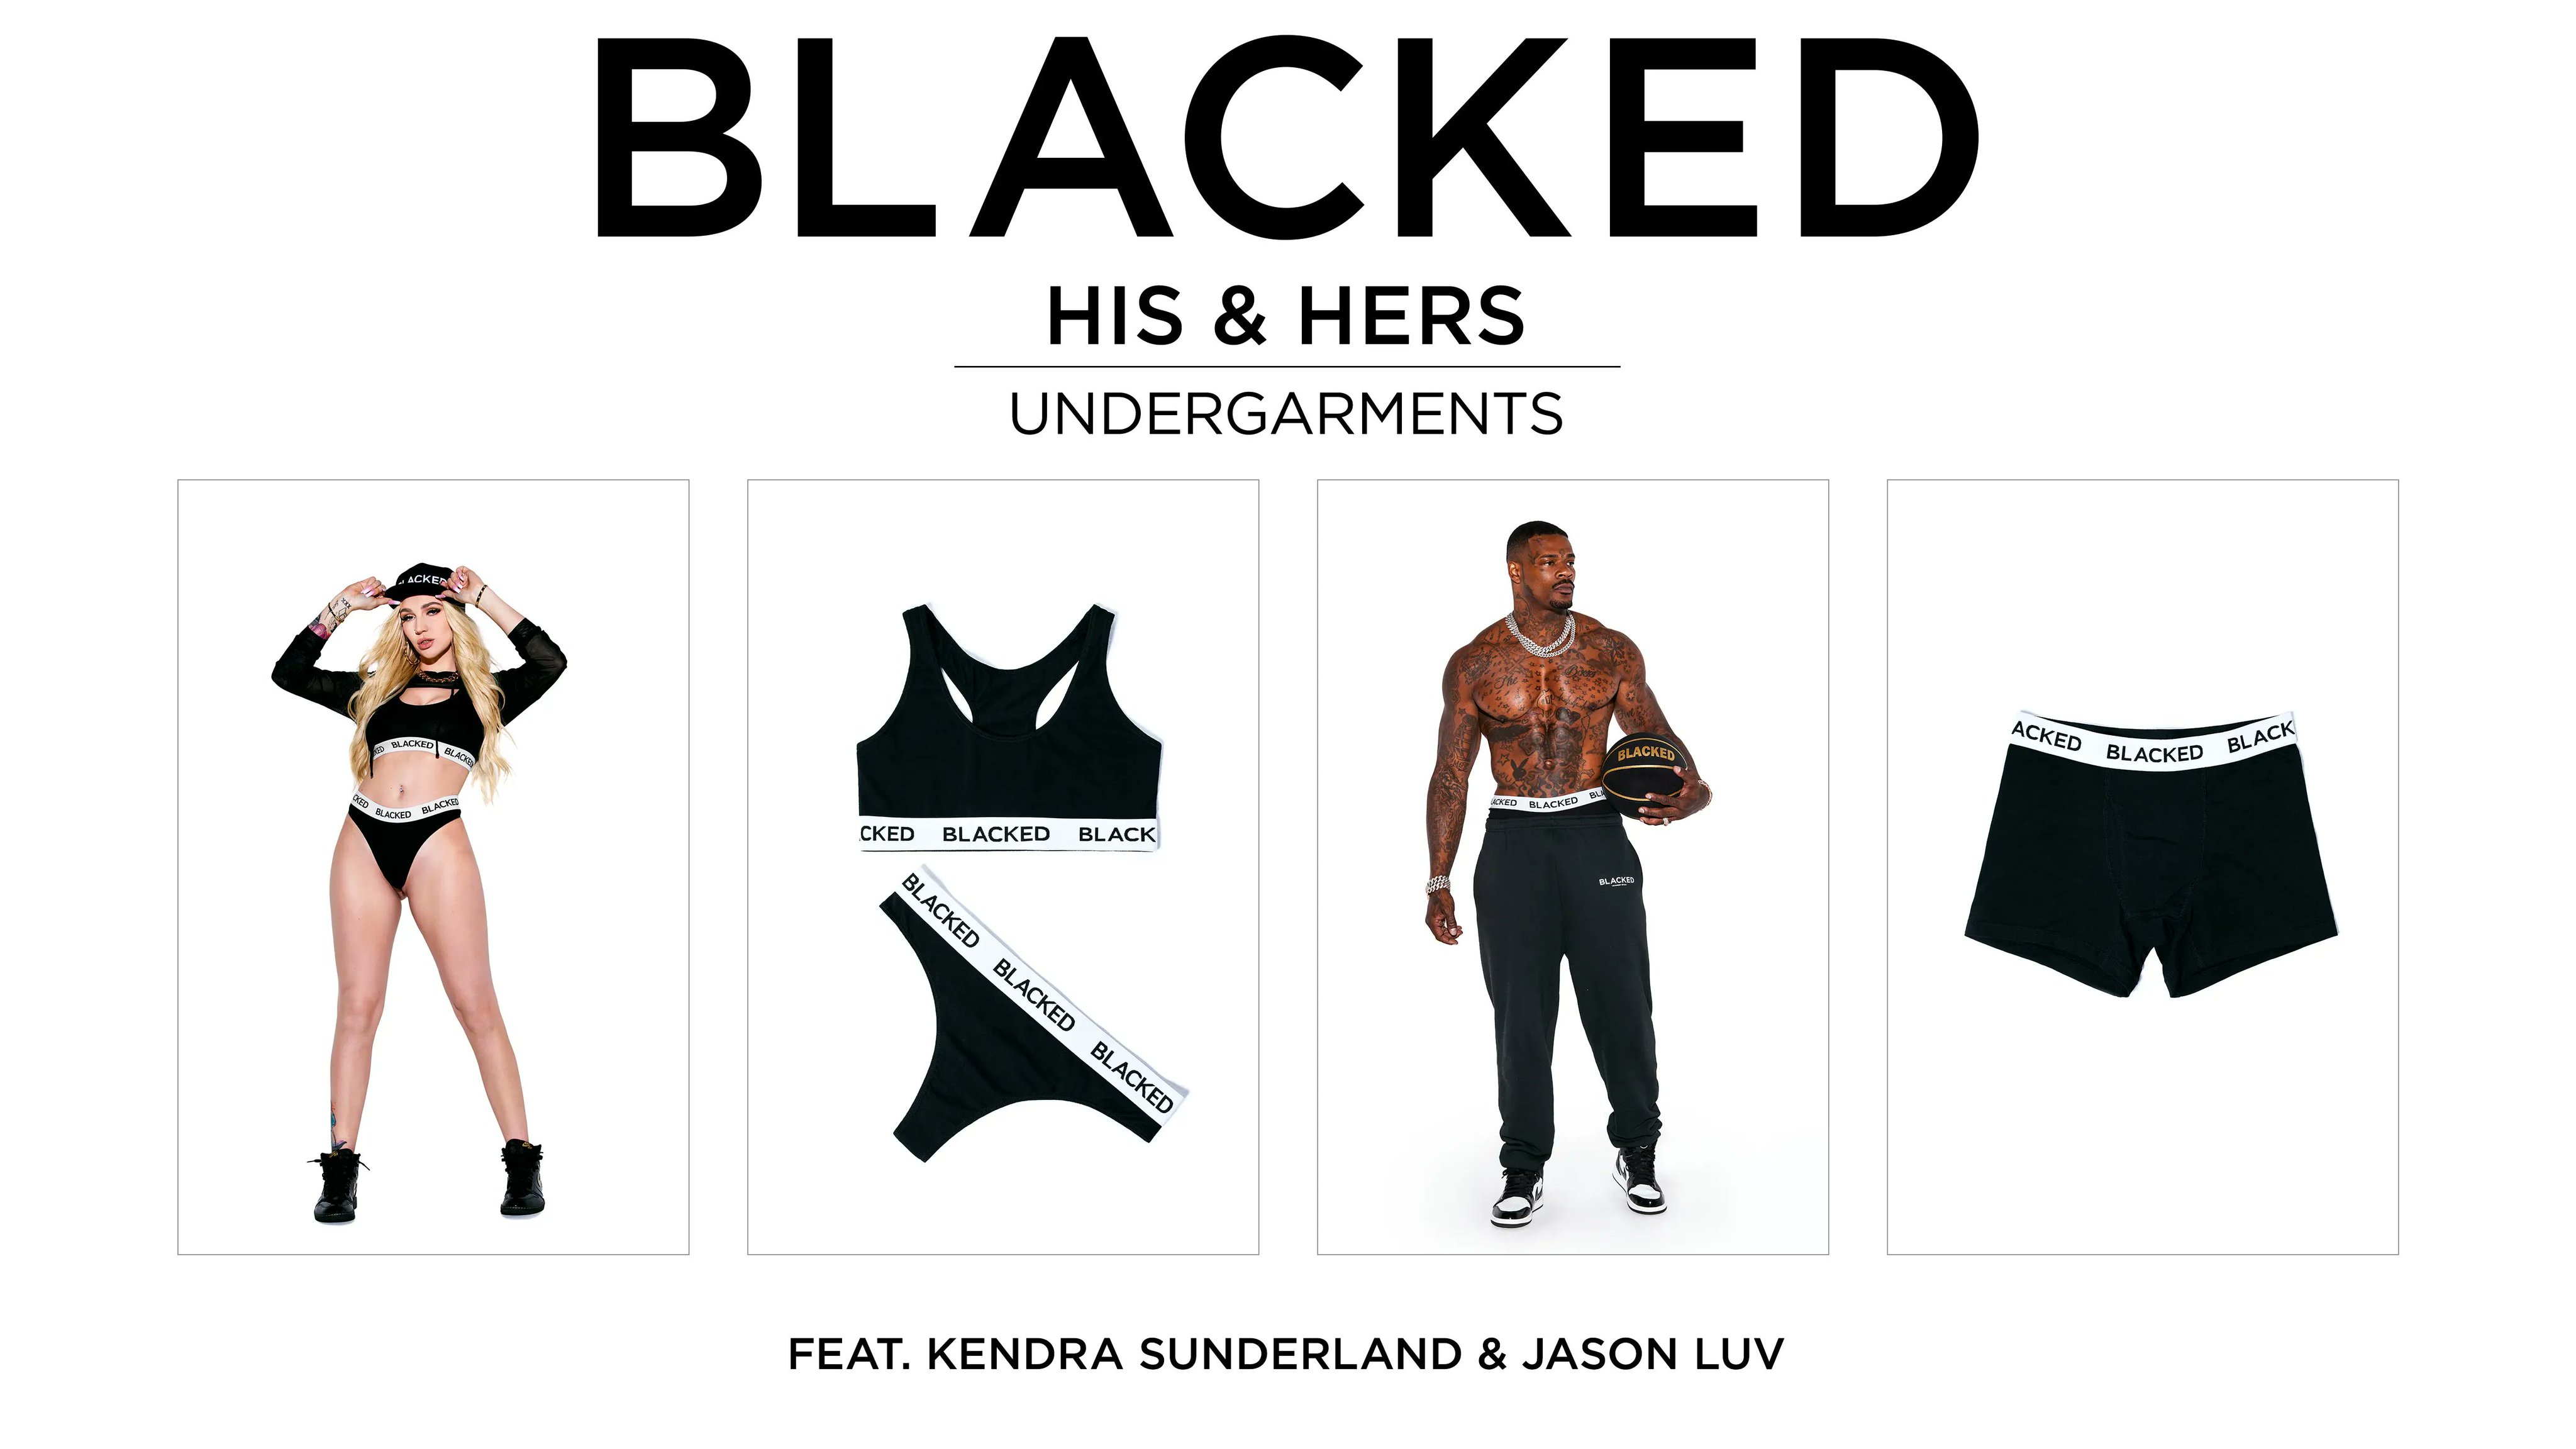 BLACKED on X: Our BLACKED His & Hers Collection just dropped and